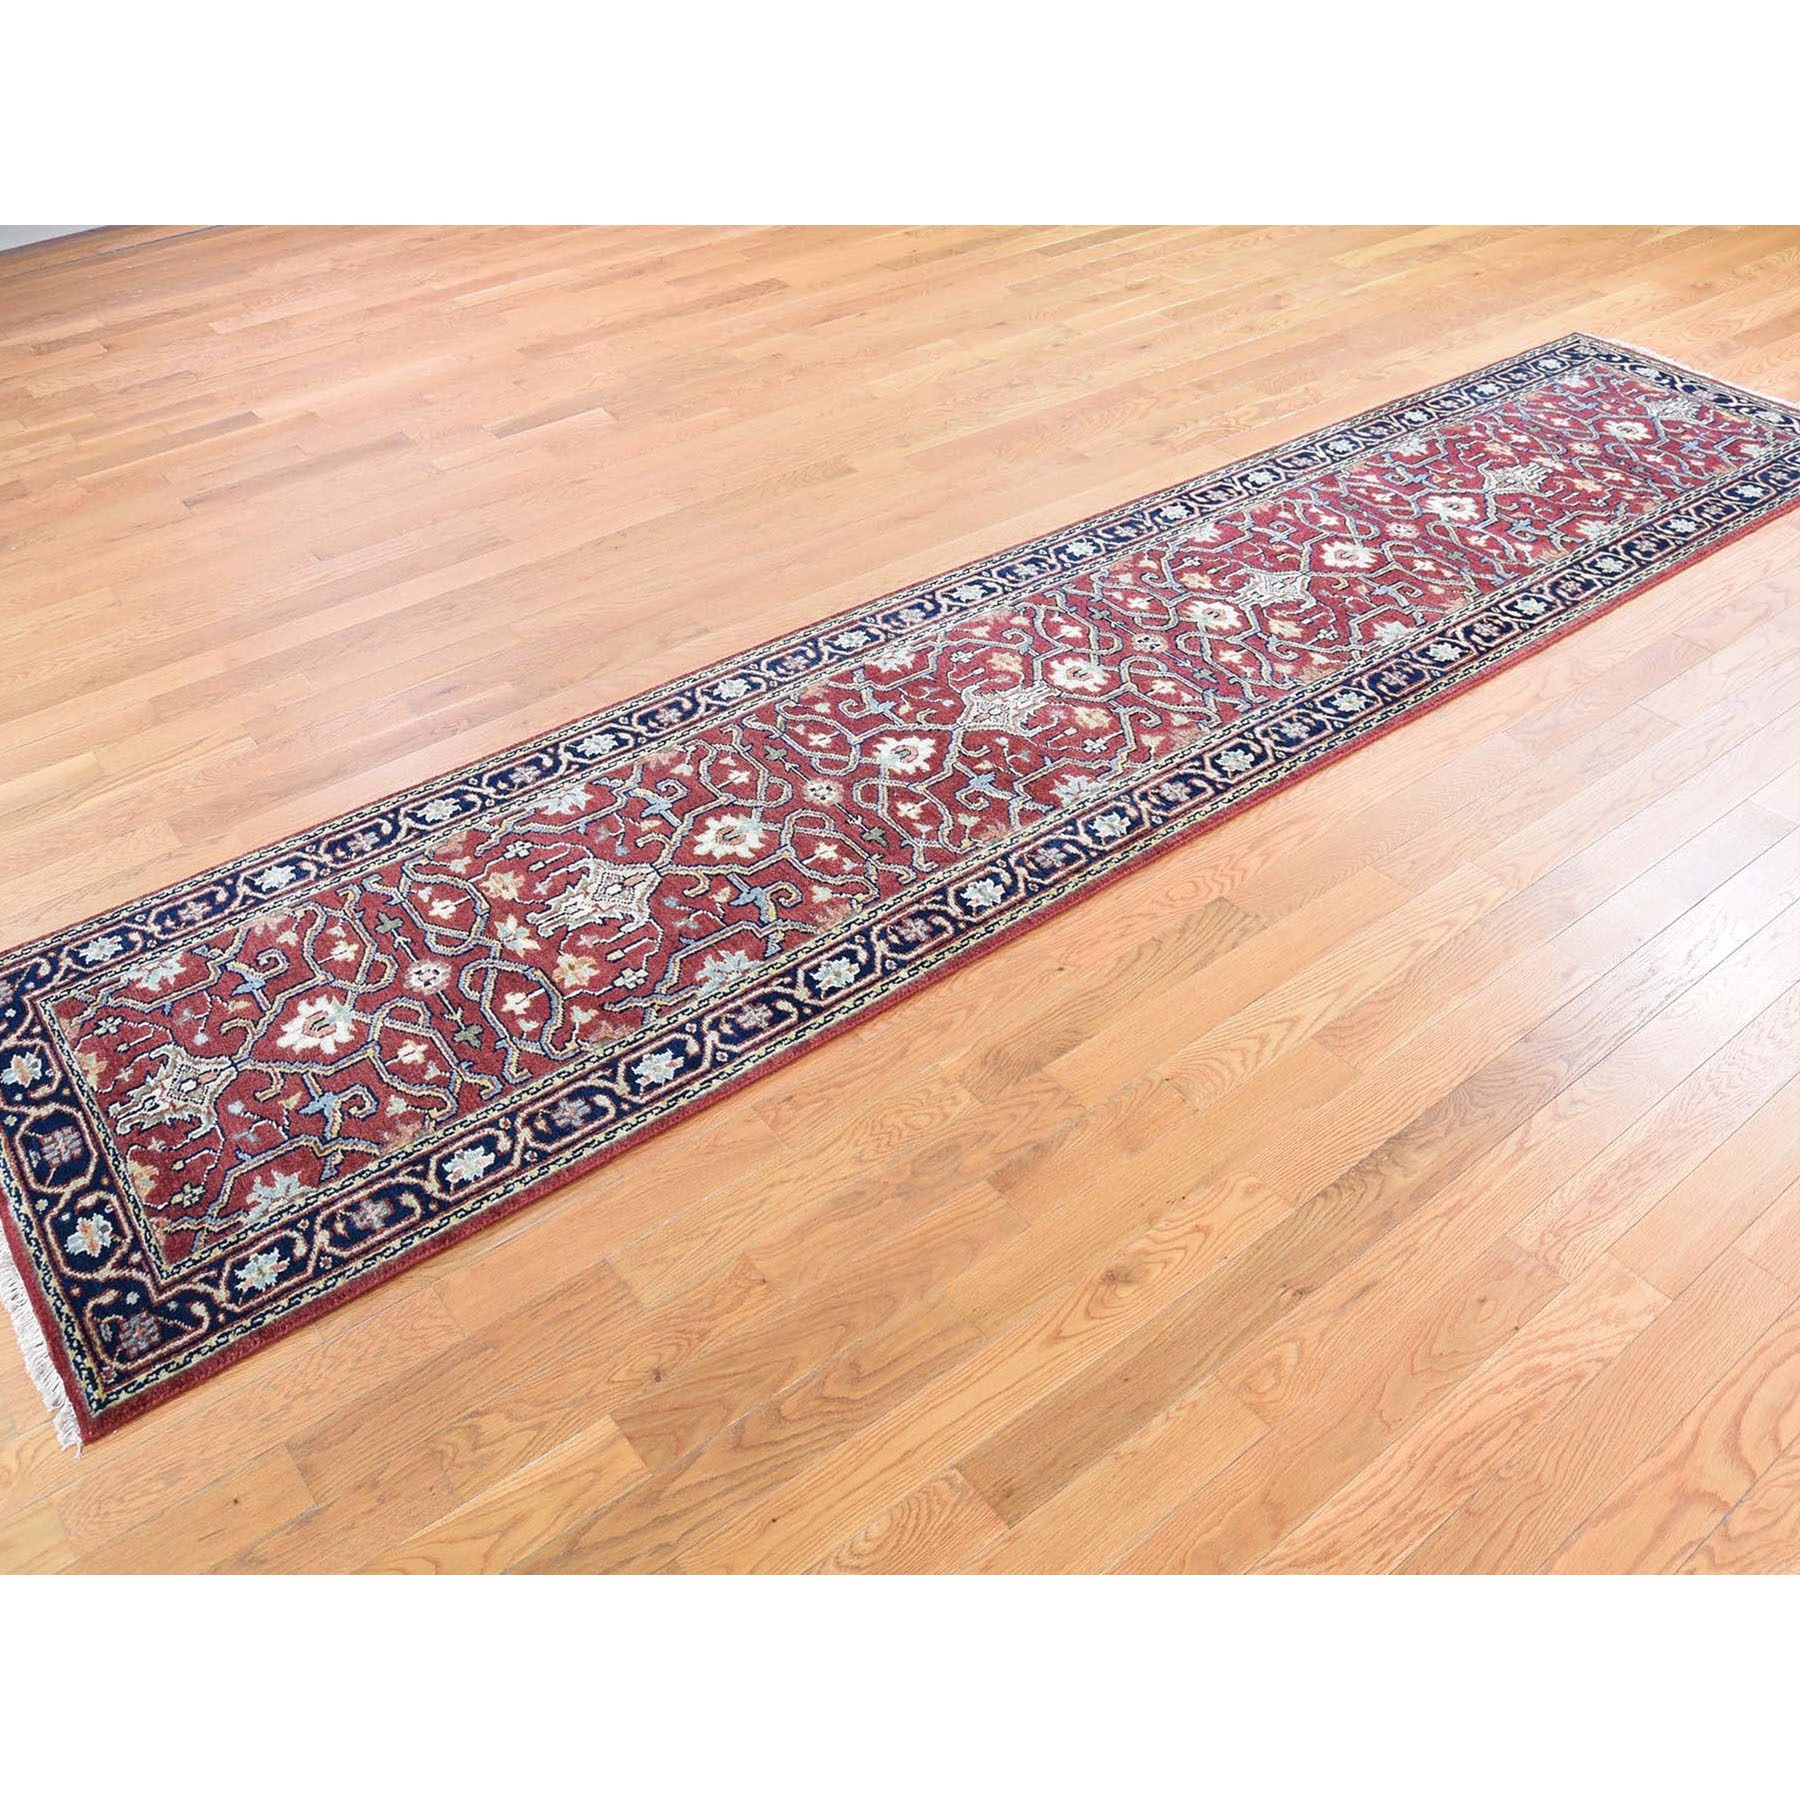 2-4 x11-8  Red Heriz Revival Pure Wool Hand-Knotted Oriental Runner Rug 